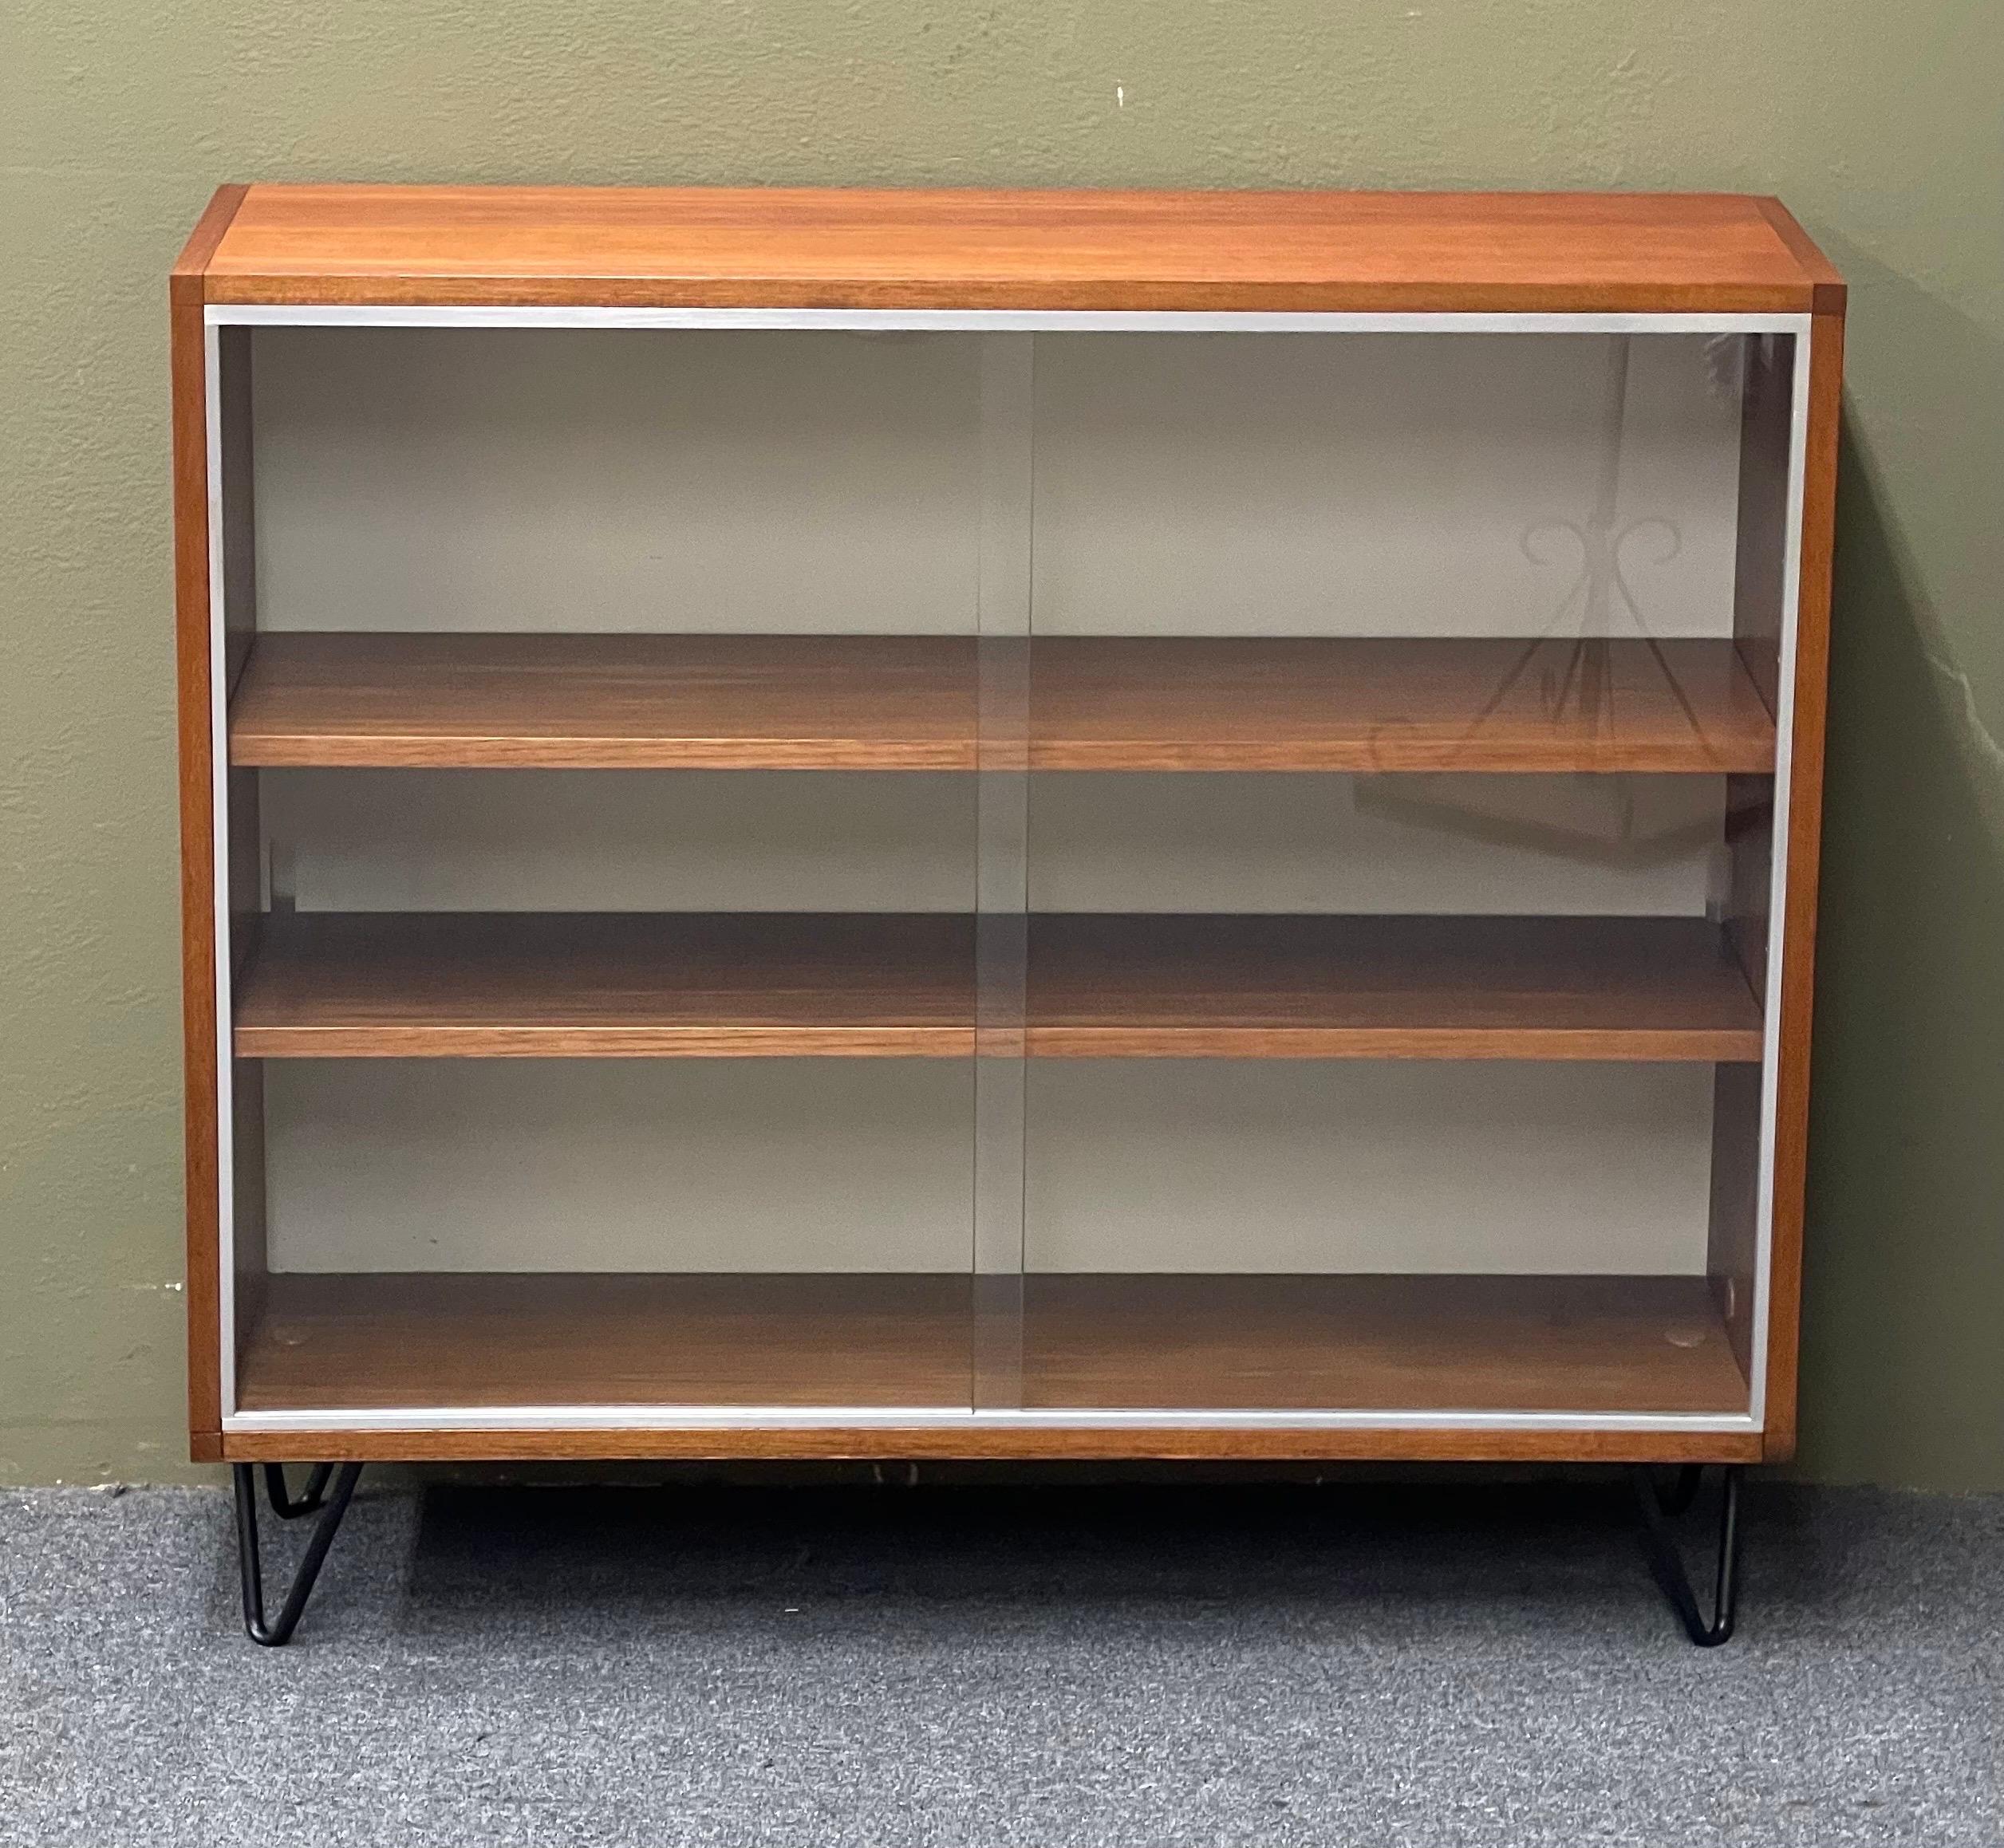 Beautiful and elegant Danish modern bookcase / cabinet, circa 1960s. The bookcase is in very good vintage condition and has been professionally refinished. It has adjustable shelves, two sliding glass doors, hairpin legs and a white board back. The